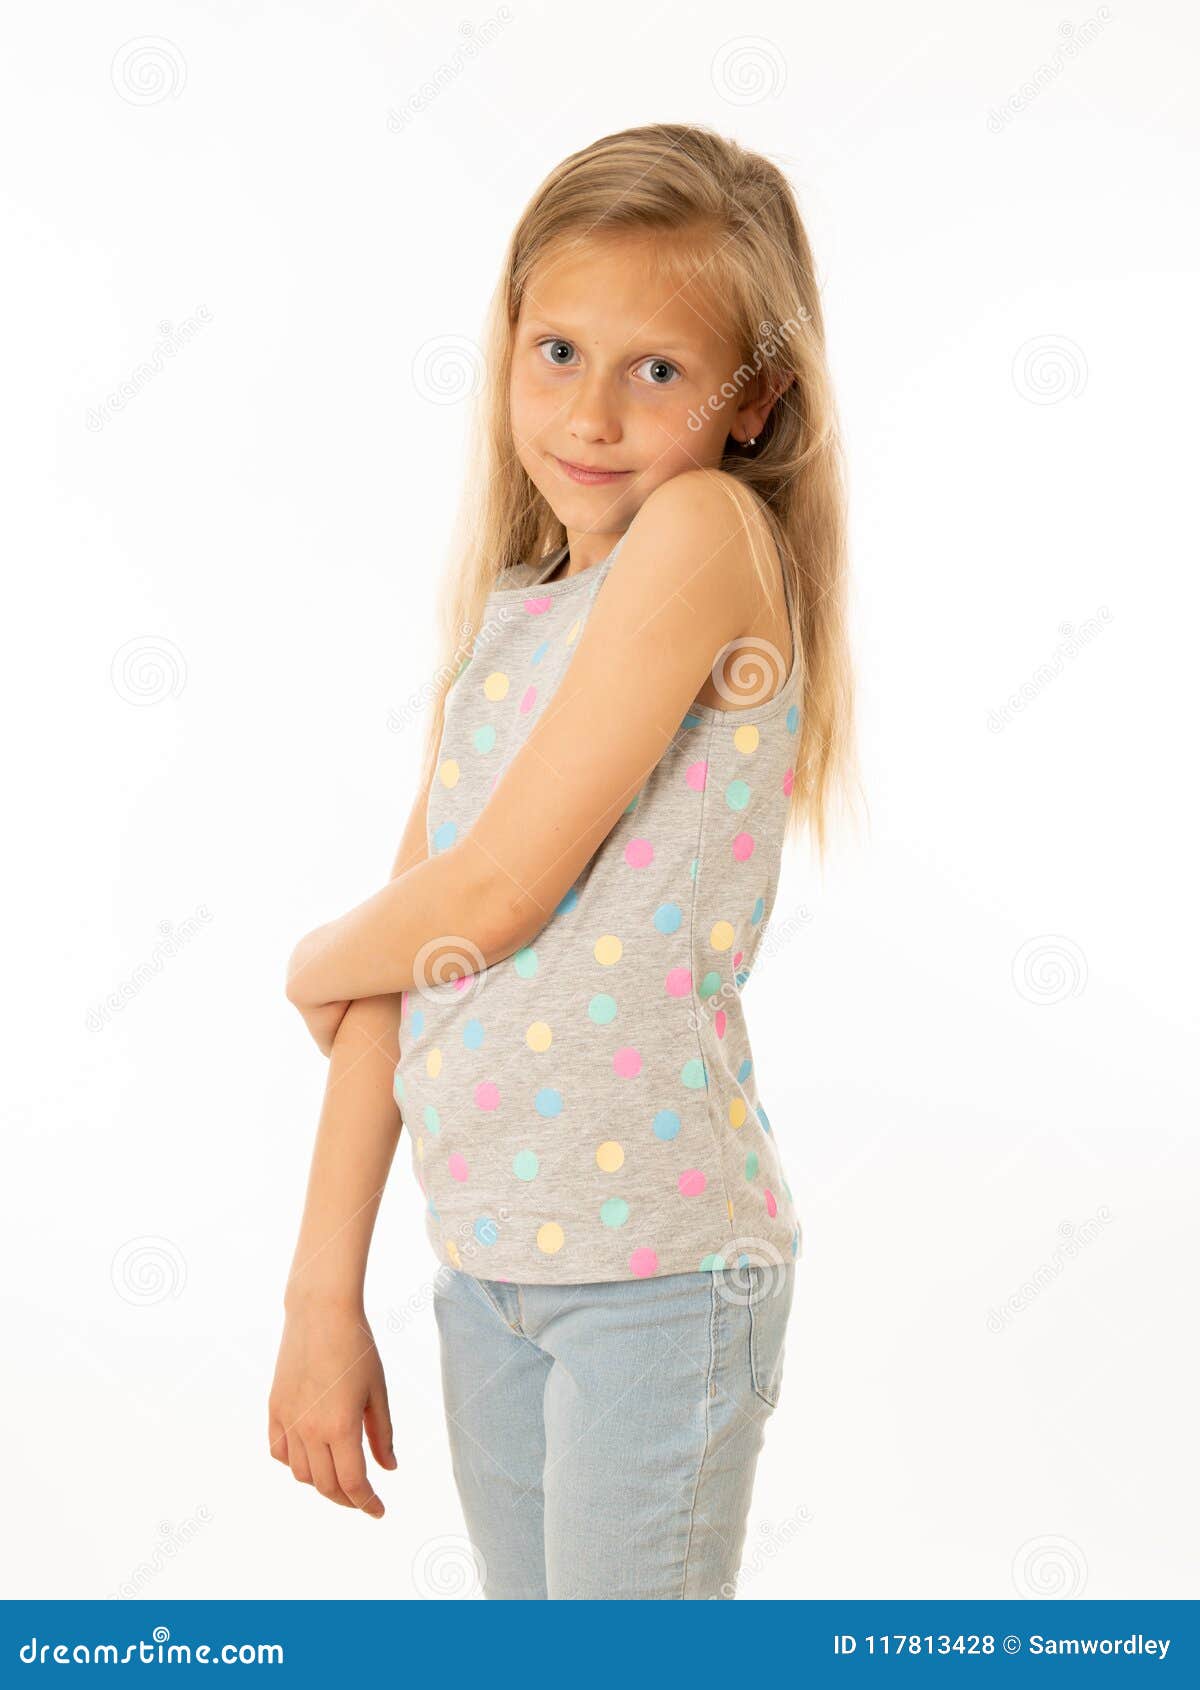 Cute Blonde Girl Looking Shy And Timid At The Camera On A White Background Human Emotions Stock